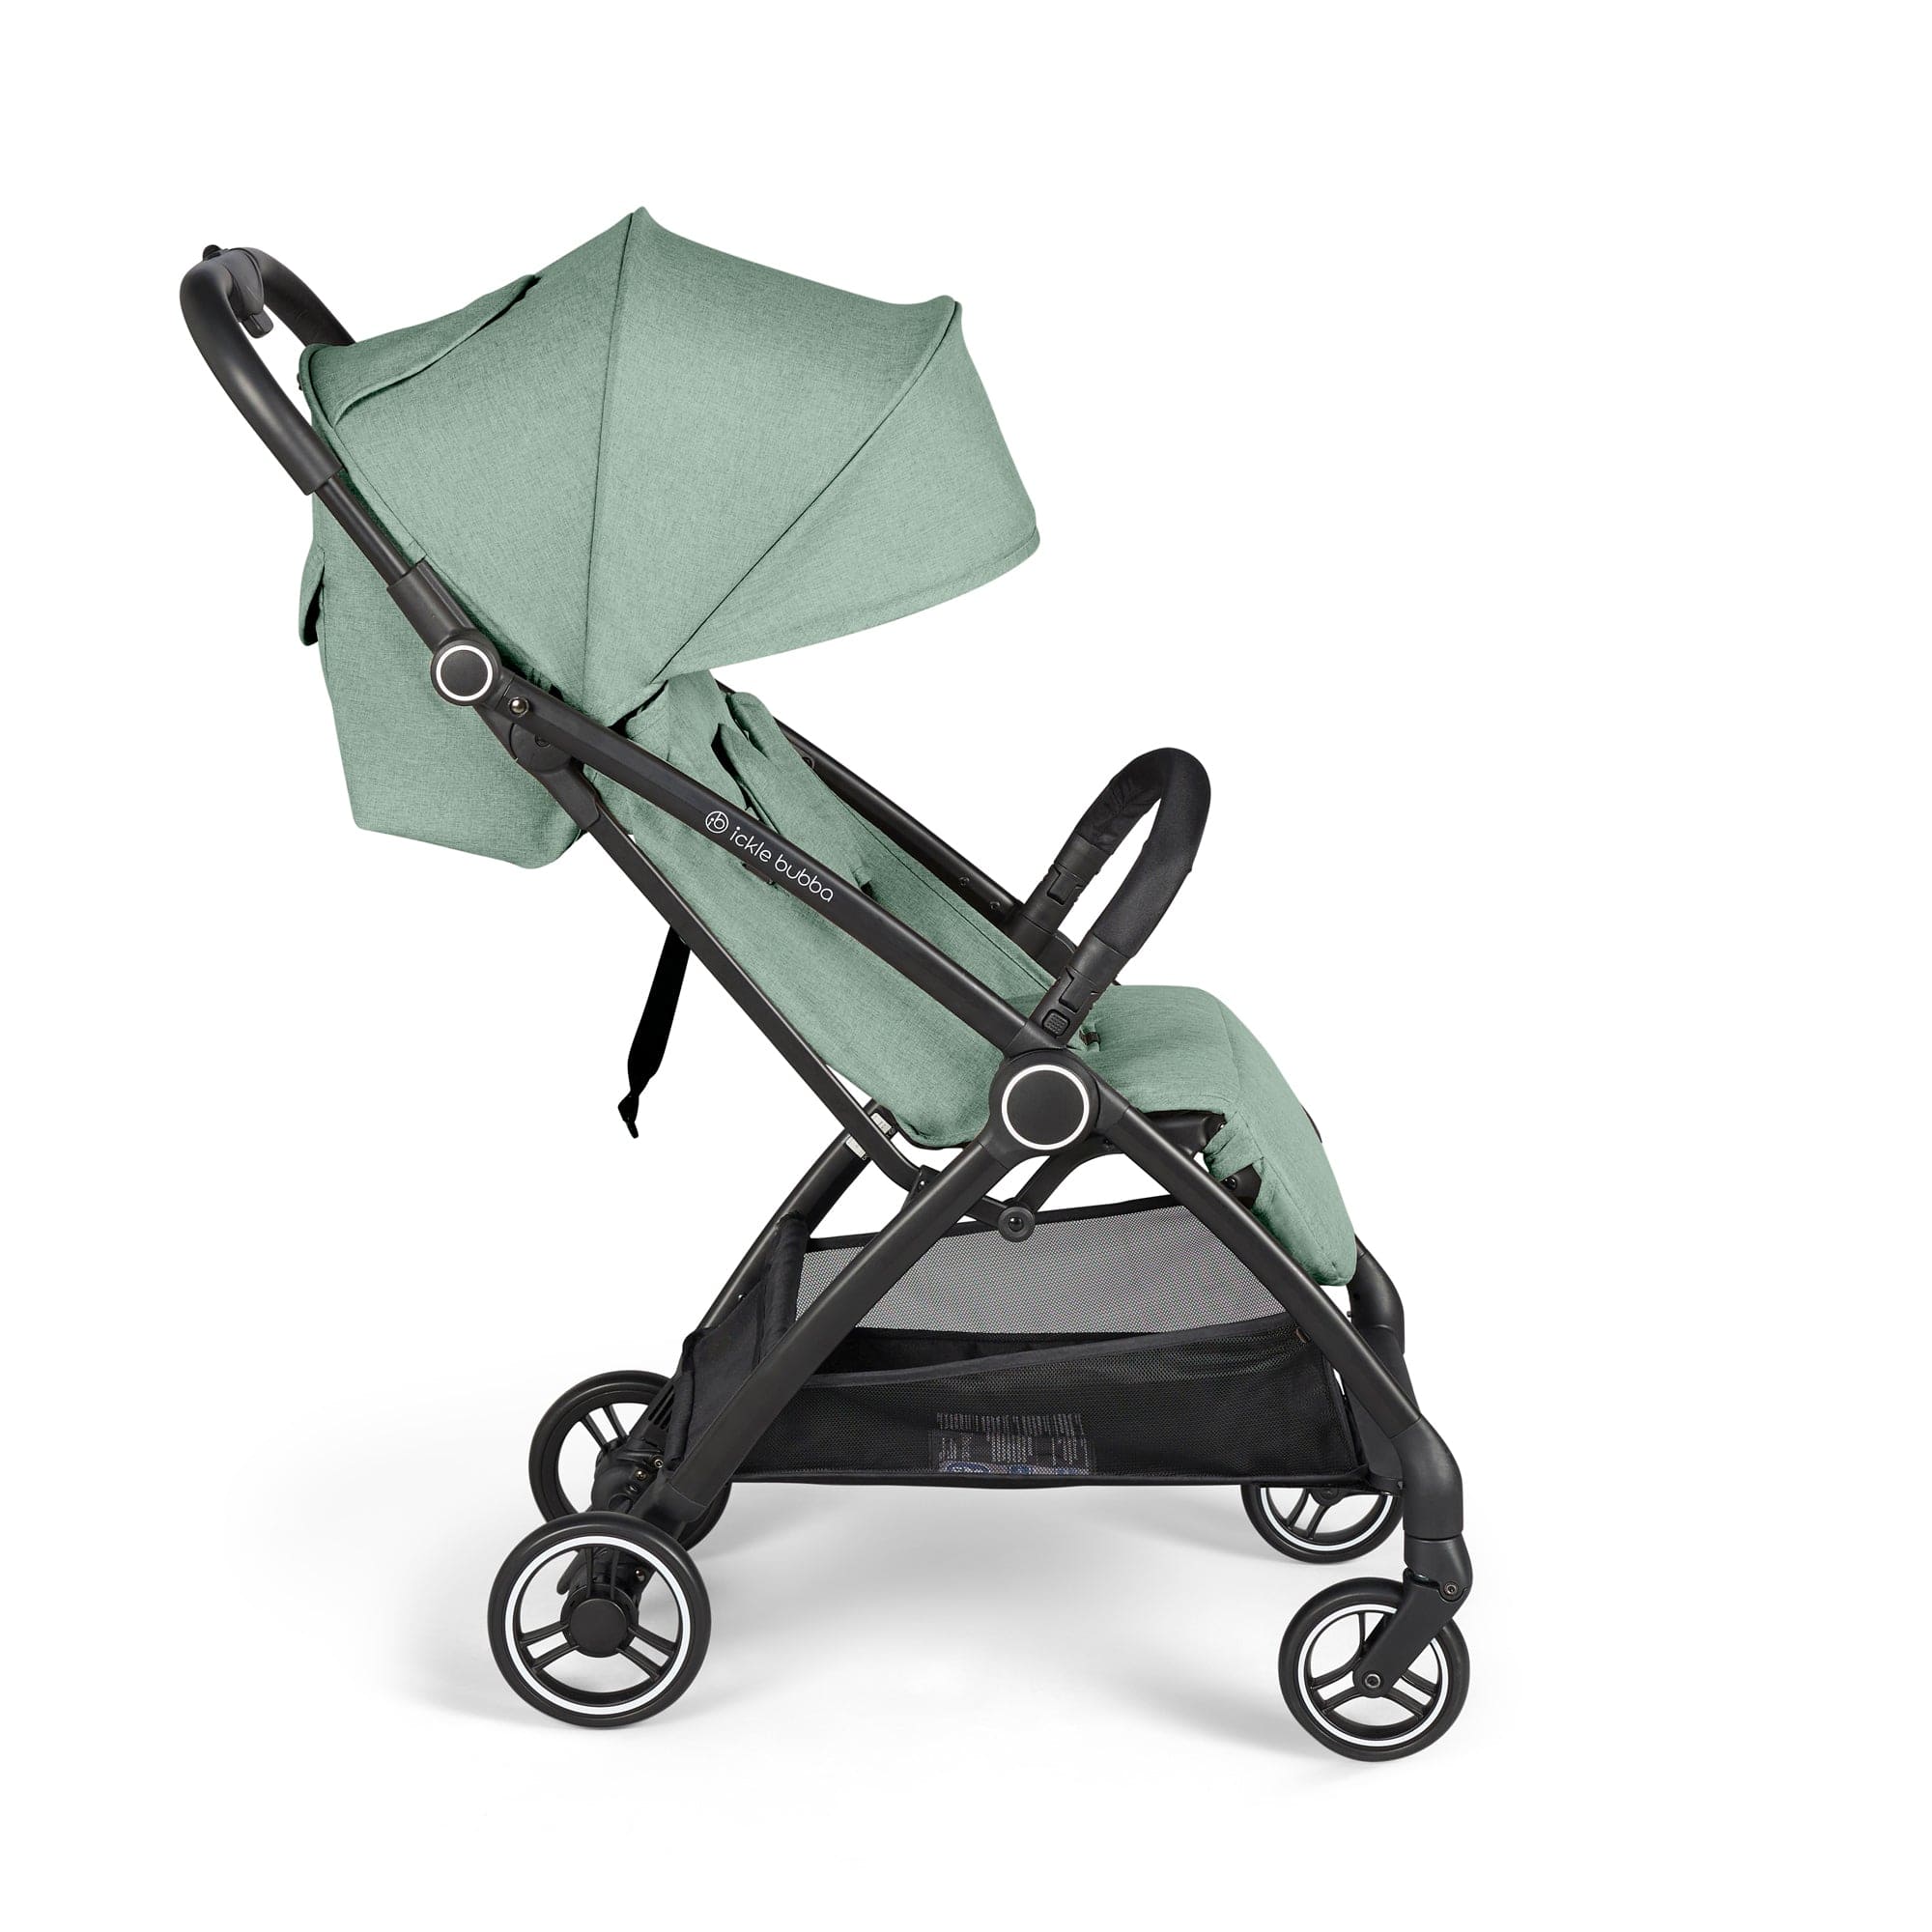 Ickle Bubba baby pushchairs Ickle Bubba Aries Prime Autofold Stroller - Sage Green 15-005-300-152